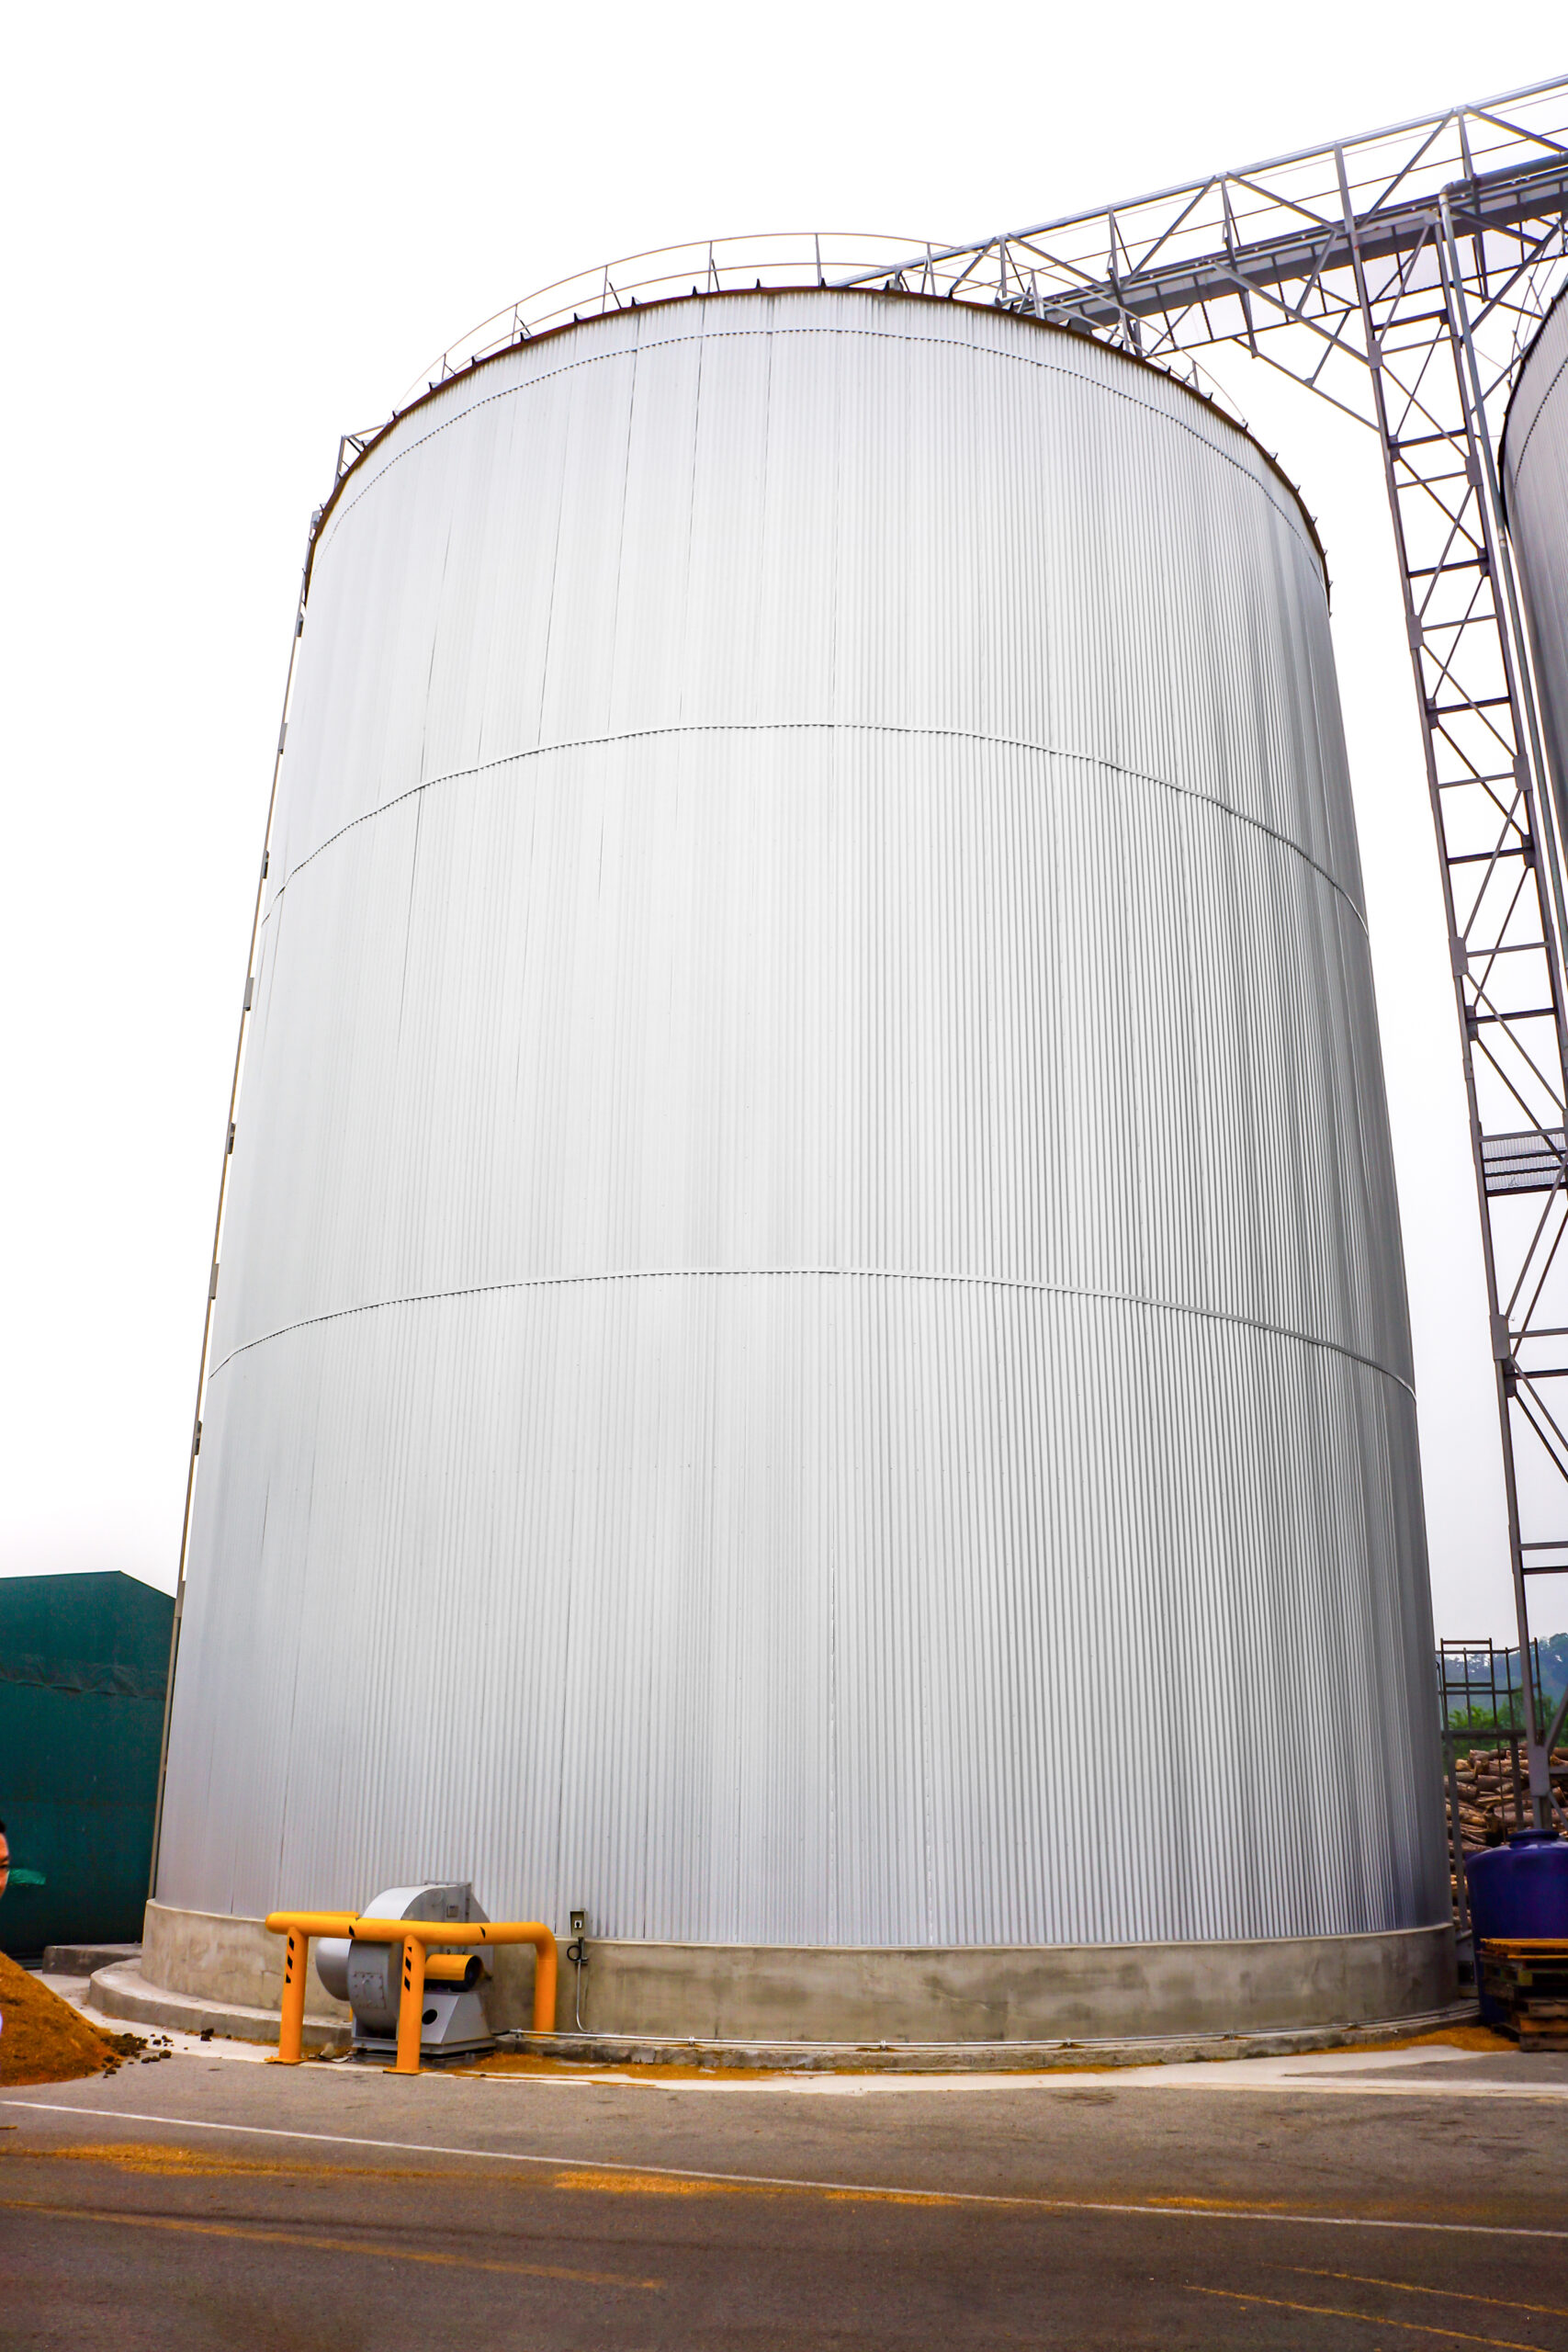 a white silo, which could contain lots of fire prone wood pellets